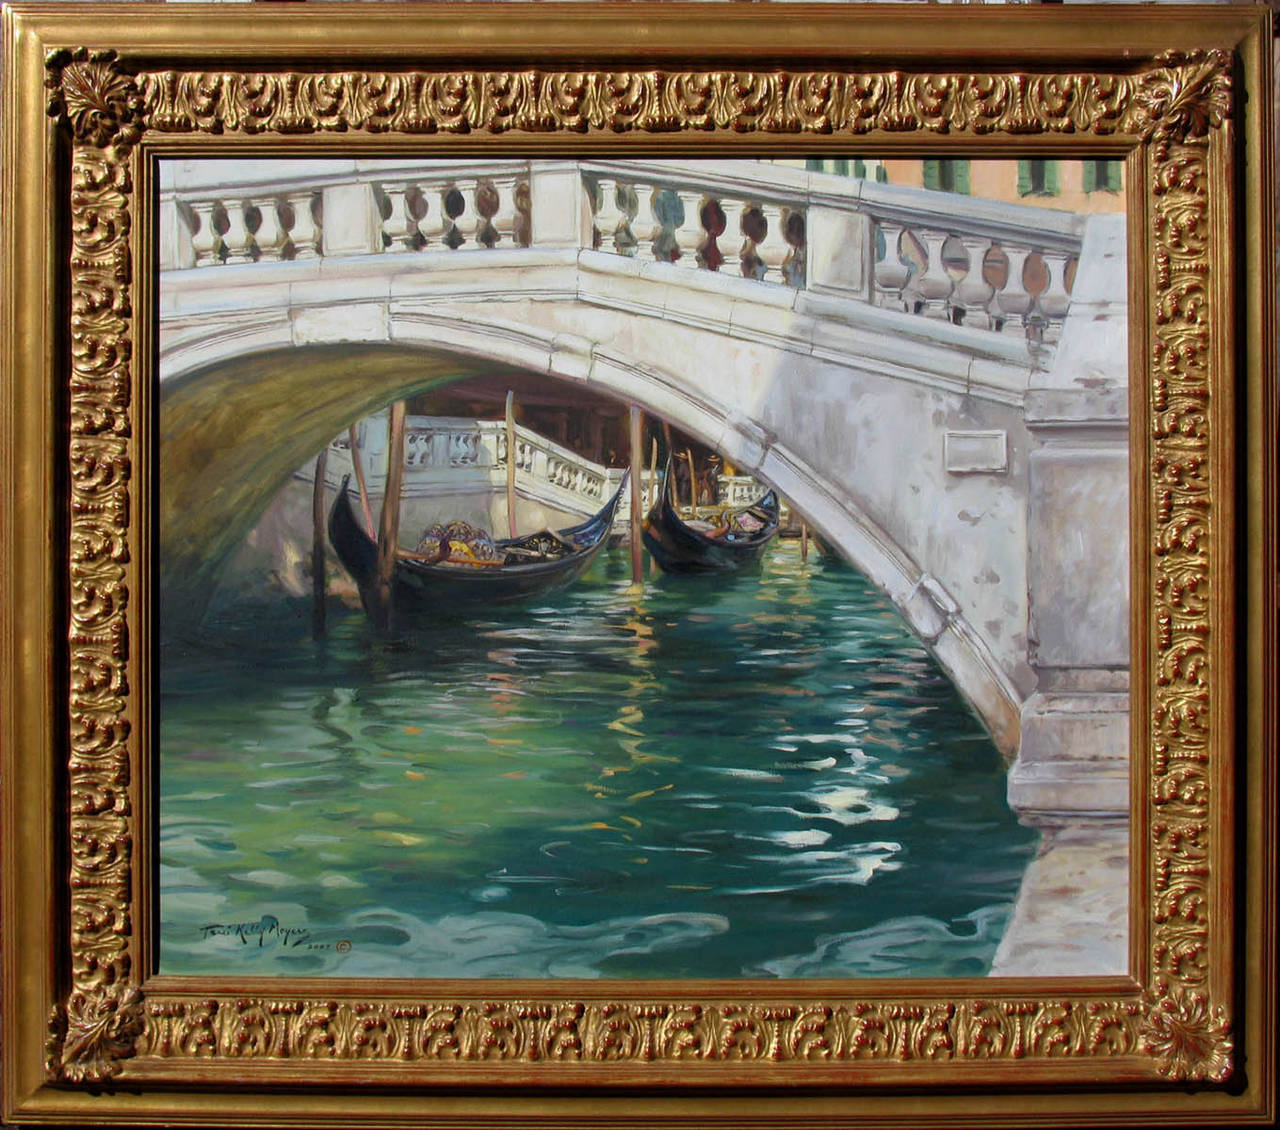 Venice Canal - Painting by Terri Kelly Moyers